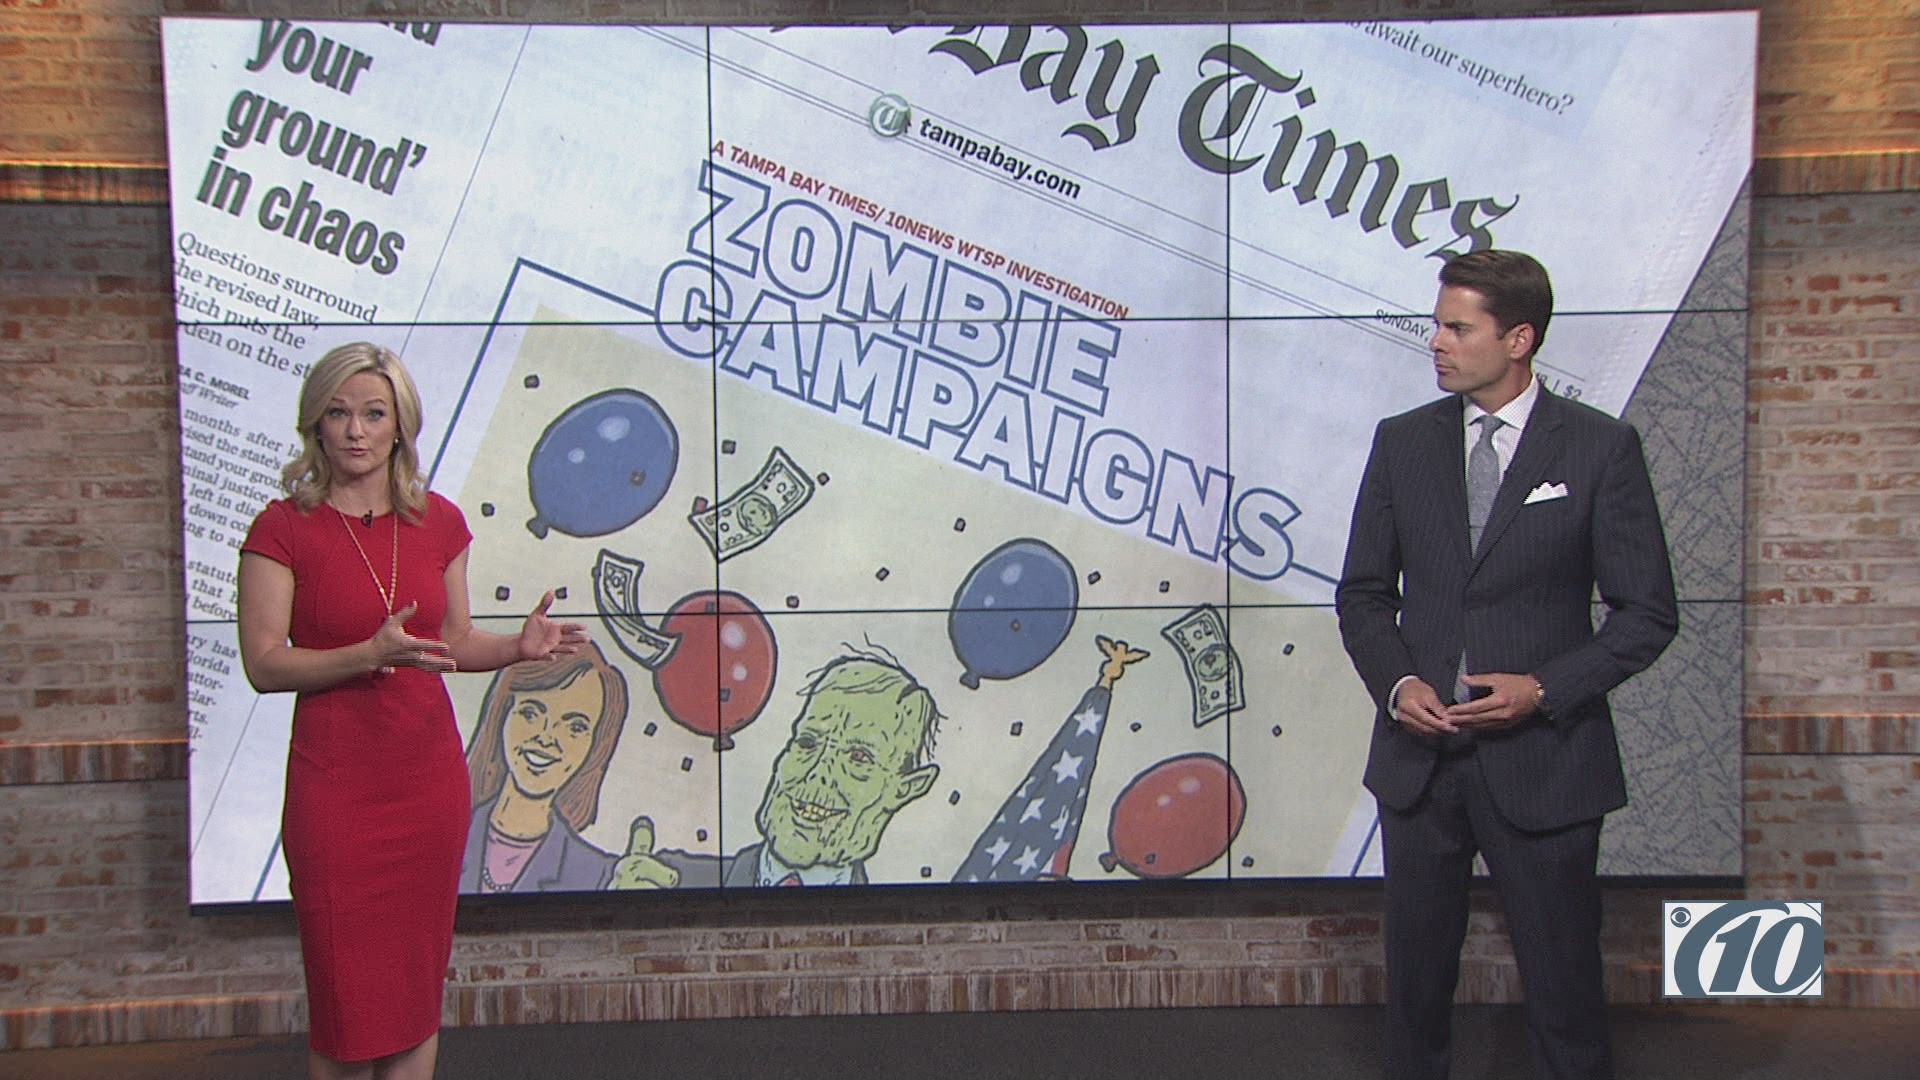 10 Investigates' Noah Pransky teamed up with the Tampa Bay Times to expose a loophole in campaign spending.